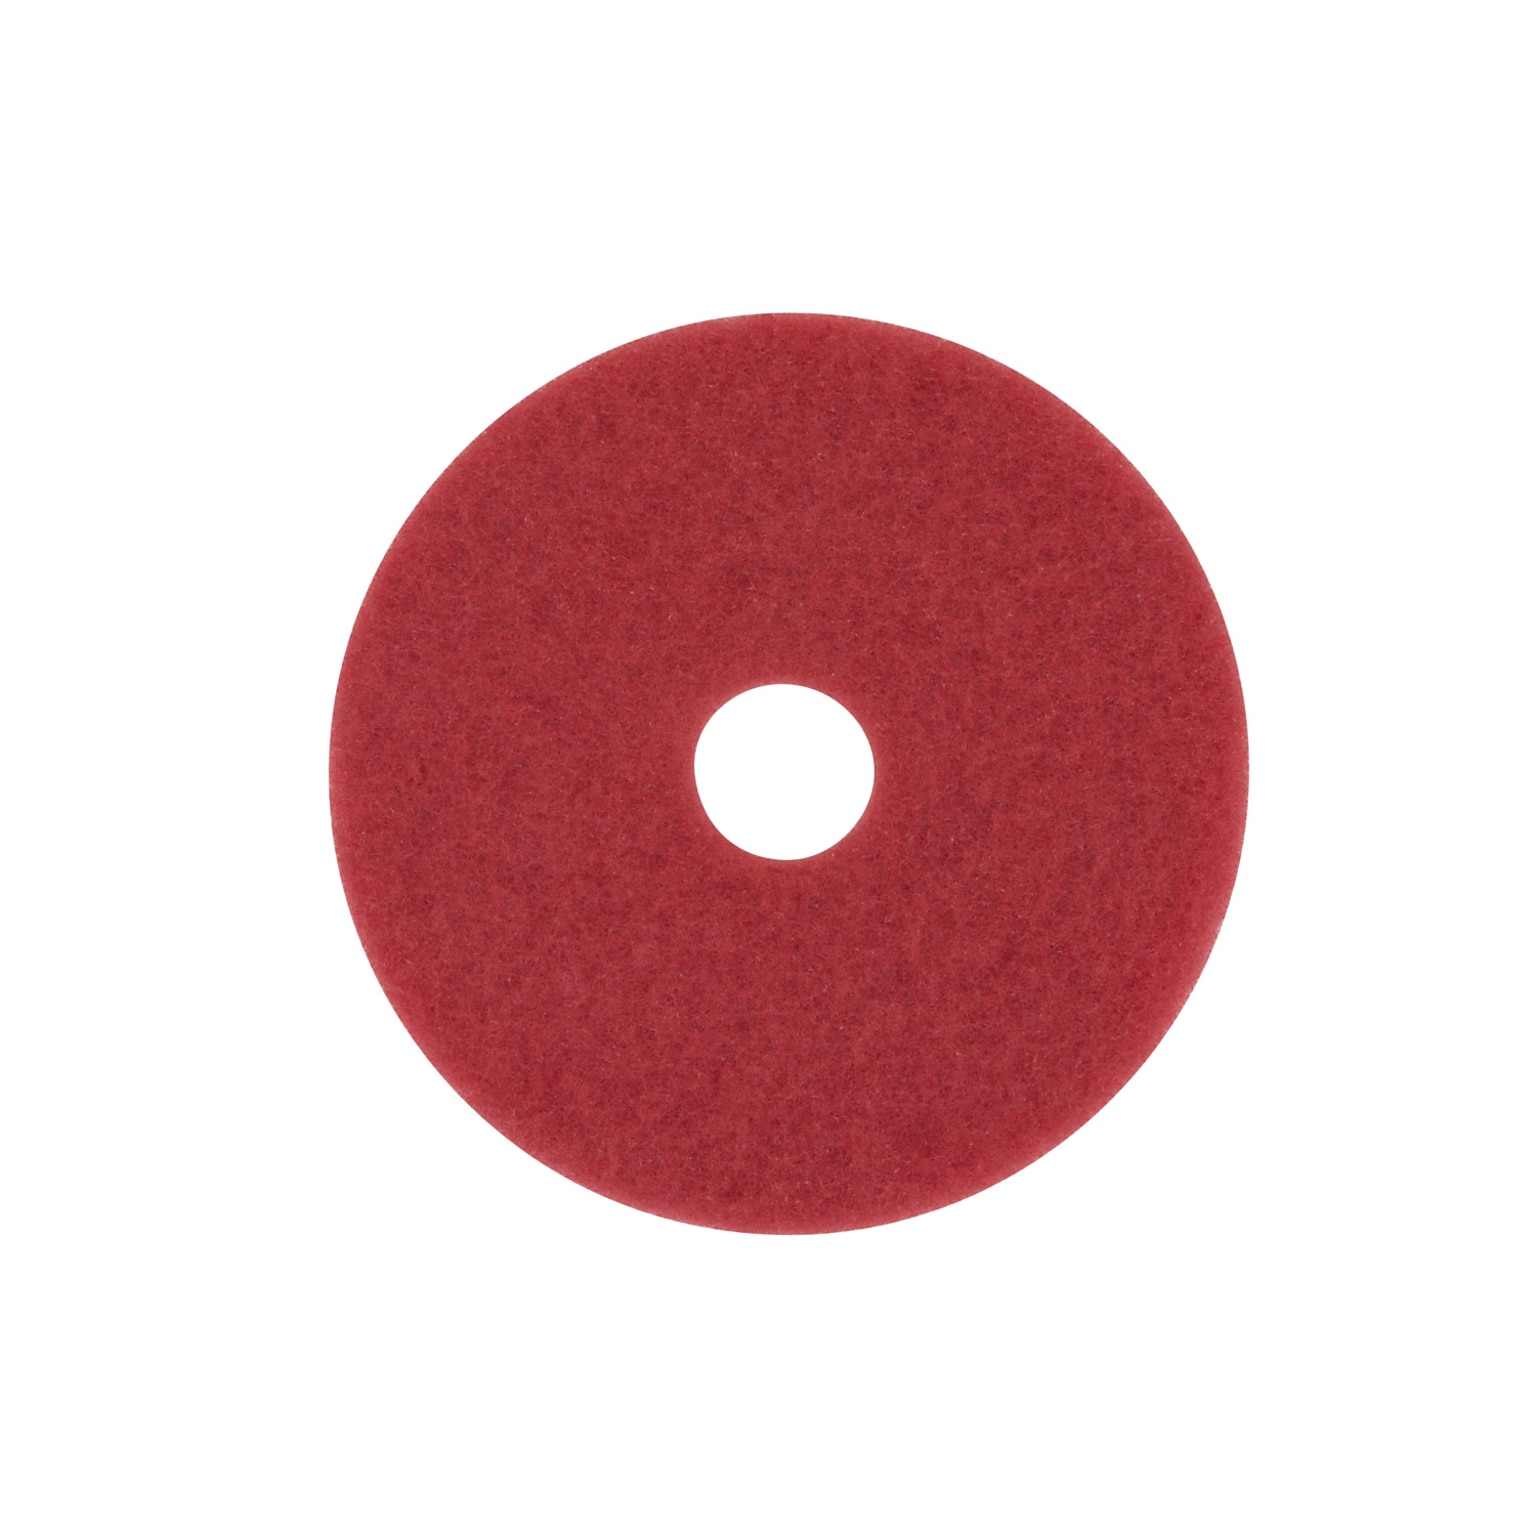 3M Low-Speed Buffing Pad, 11, Red 5/Carton (510011)